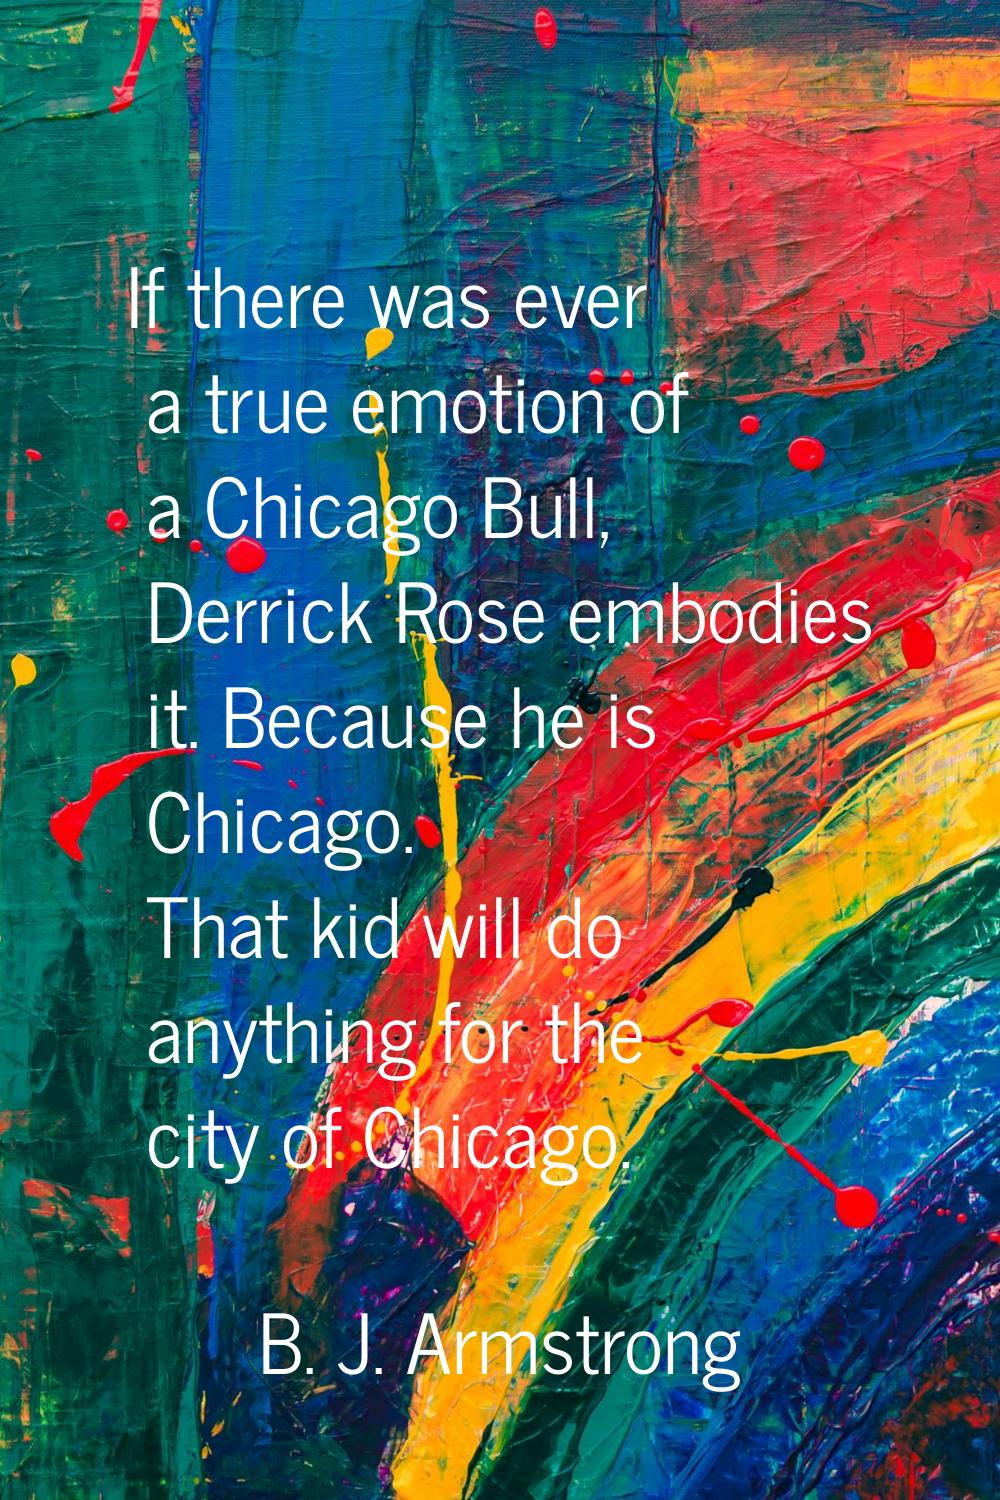 If there was ever a true emotion of a Chicago Bull, Derrick Rose embodies it. Because he is Chicago